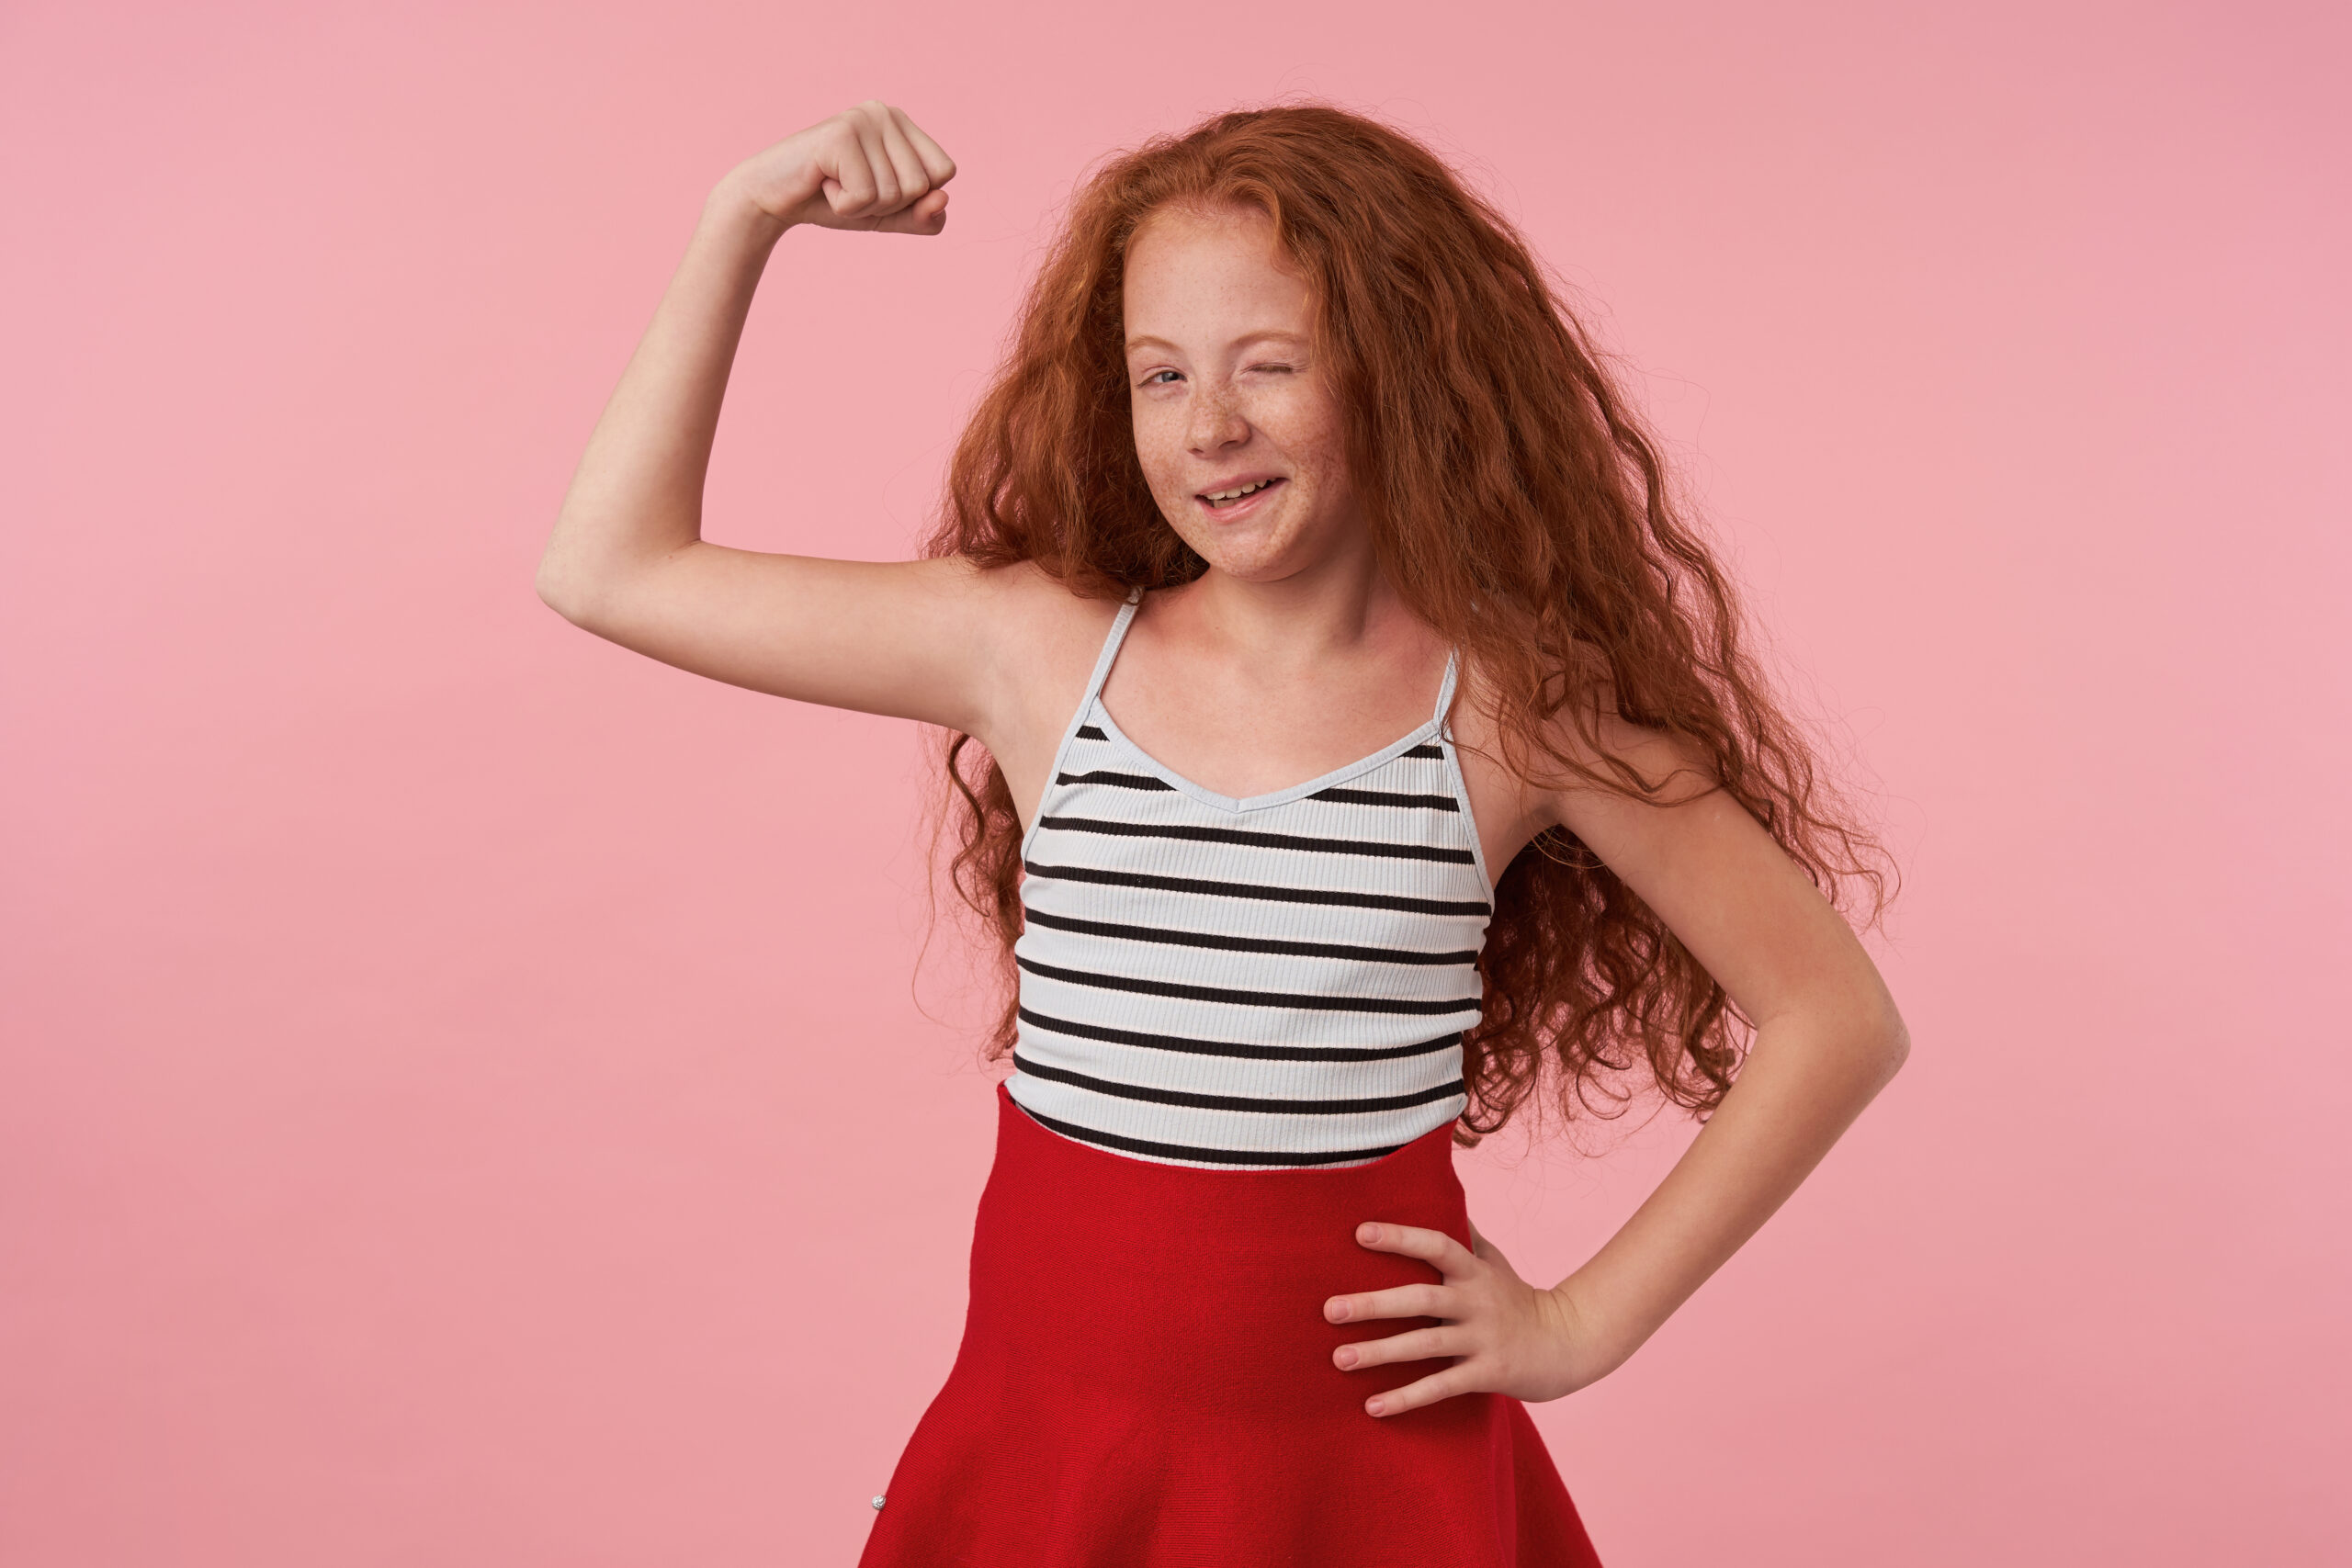 Posititve lovely female kid with long foxy hair posing over pink background in red skirt and striped top, winking cheerfully to camera and raising hand to show her power